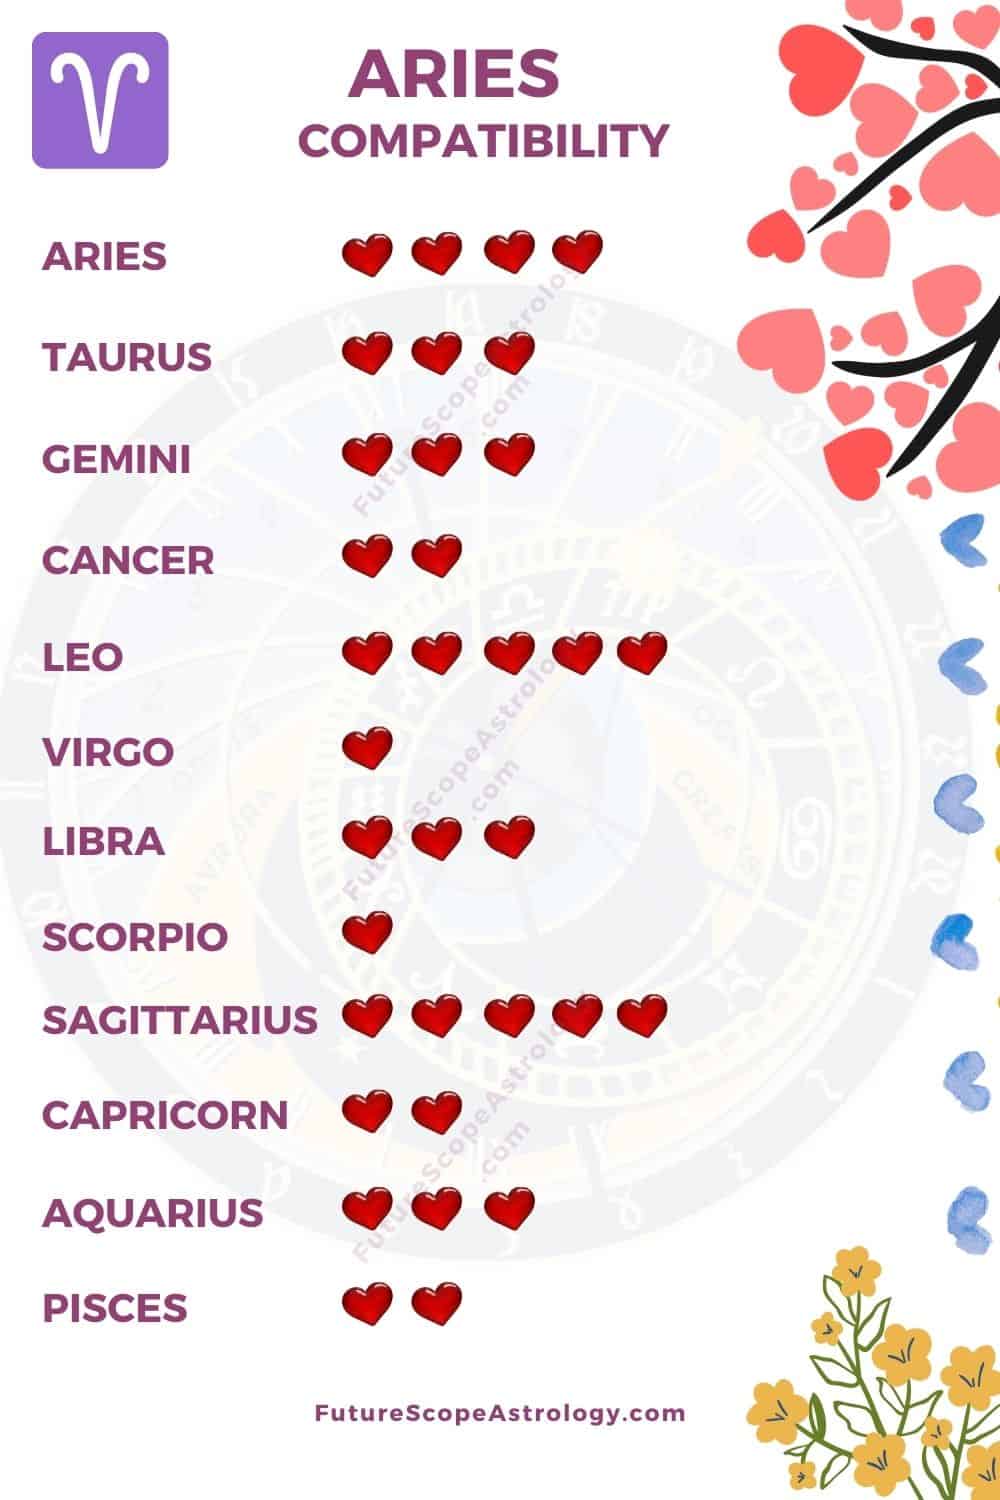 Virgo and pisces compatibility chart